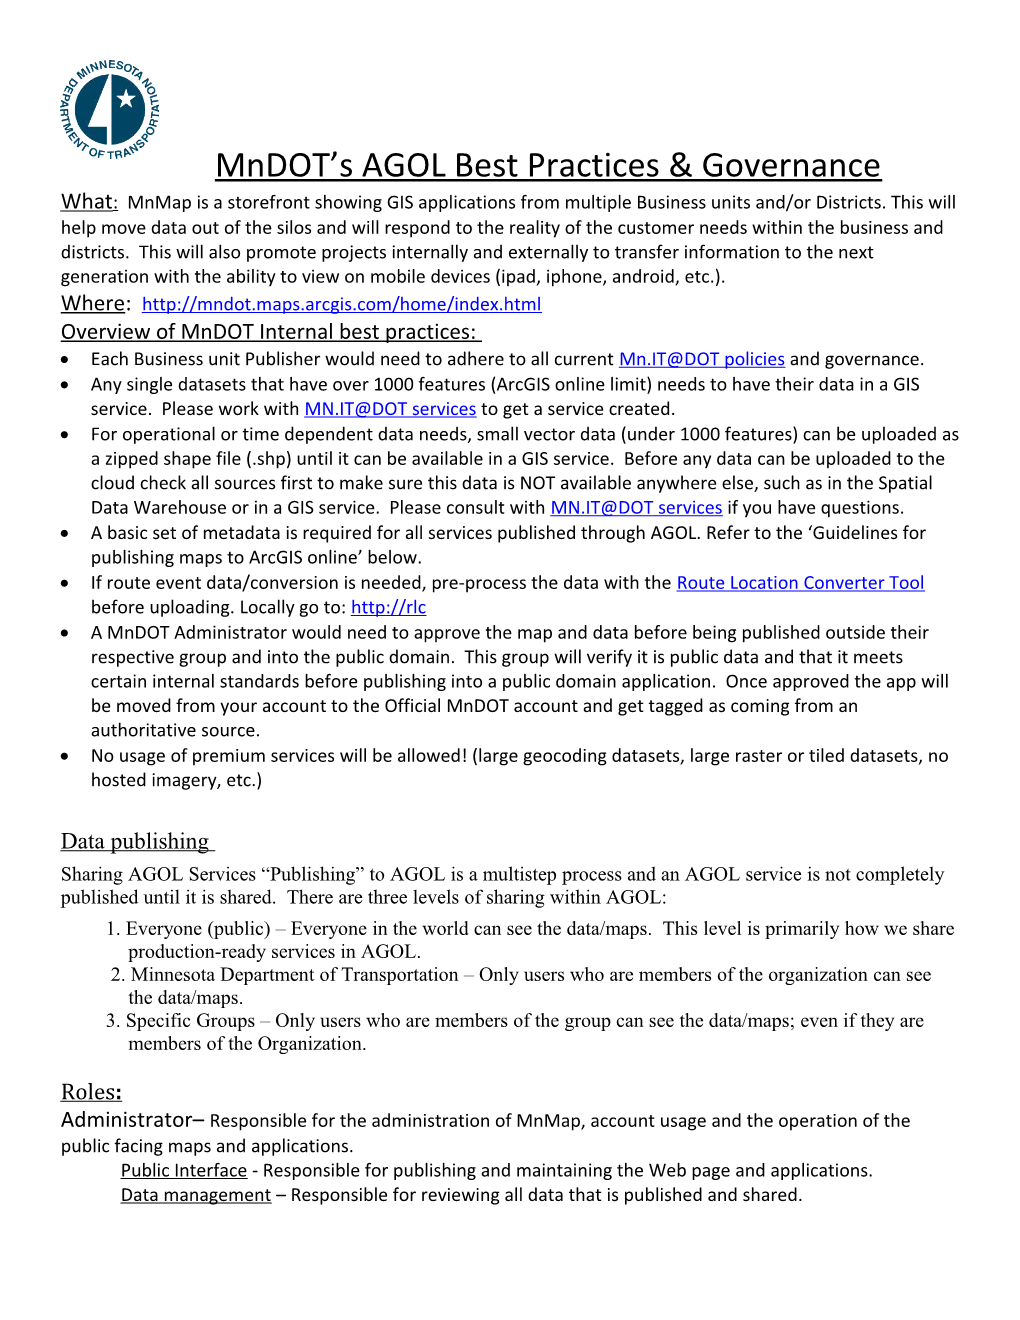 Mndot Governance and Best Practices and User Requirements